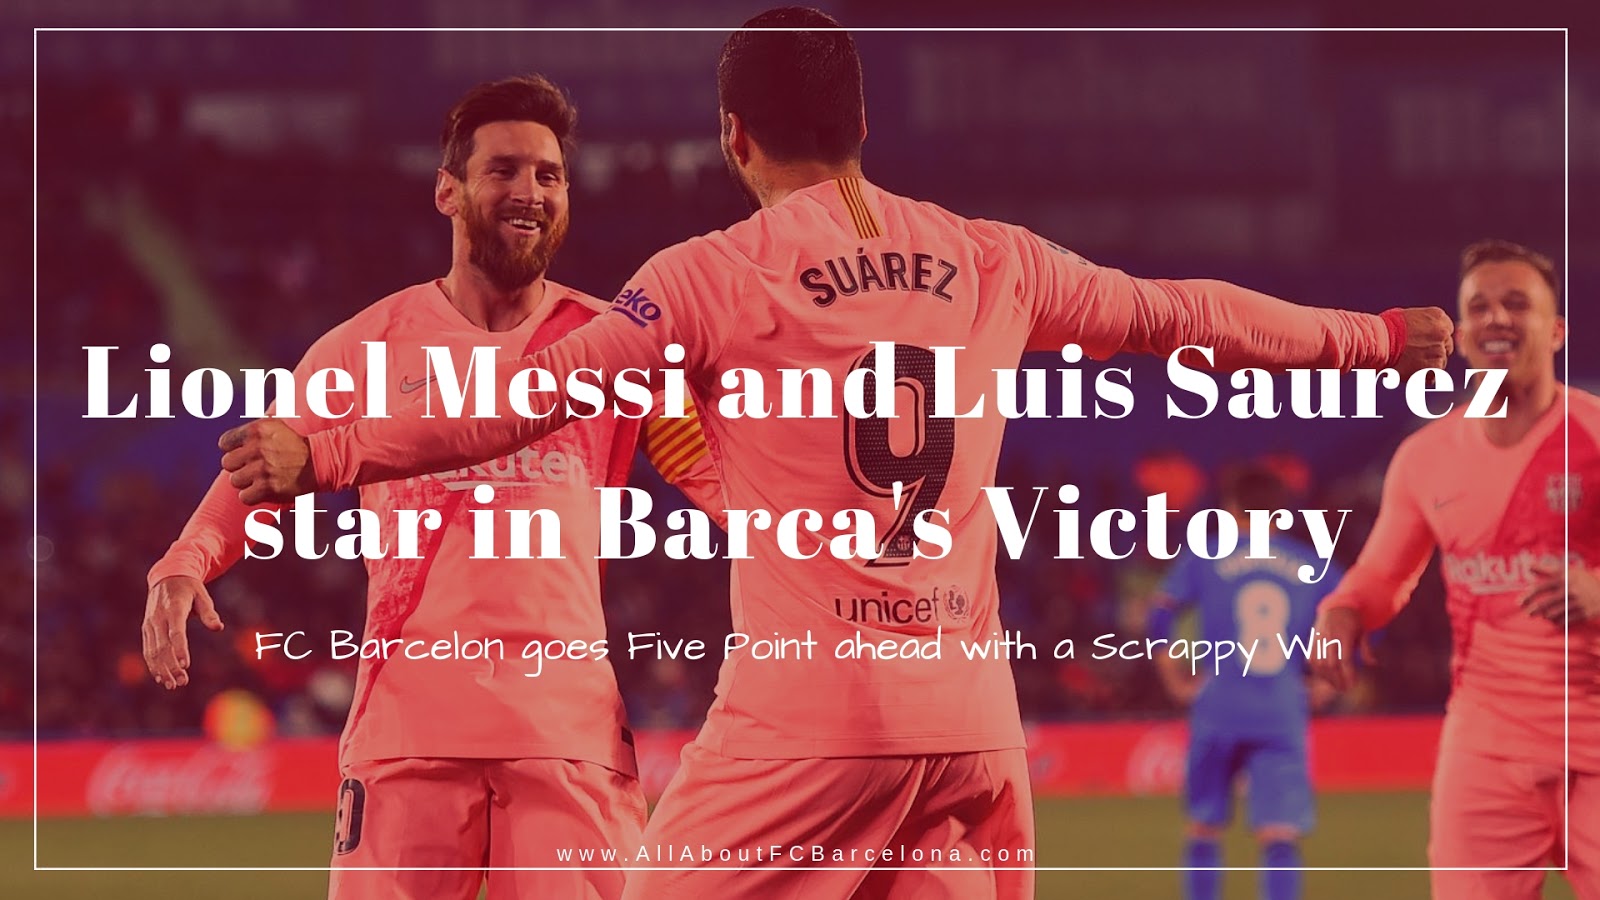  FC Barcelona Starts Year 2019 with a Competitive Victory over Getafe #Barca #FCBarcelona #Messi #Saurez